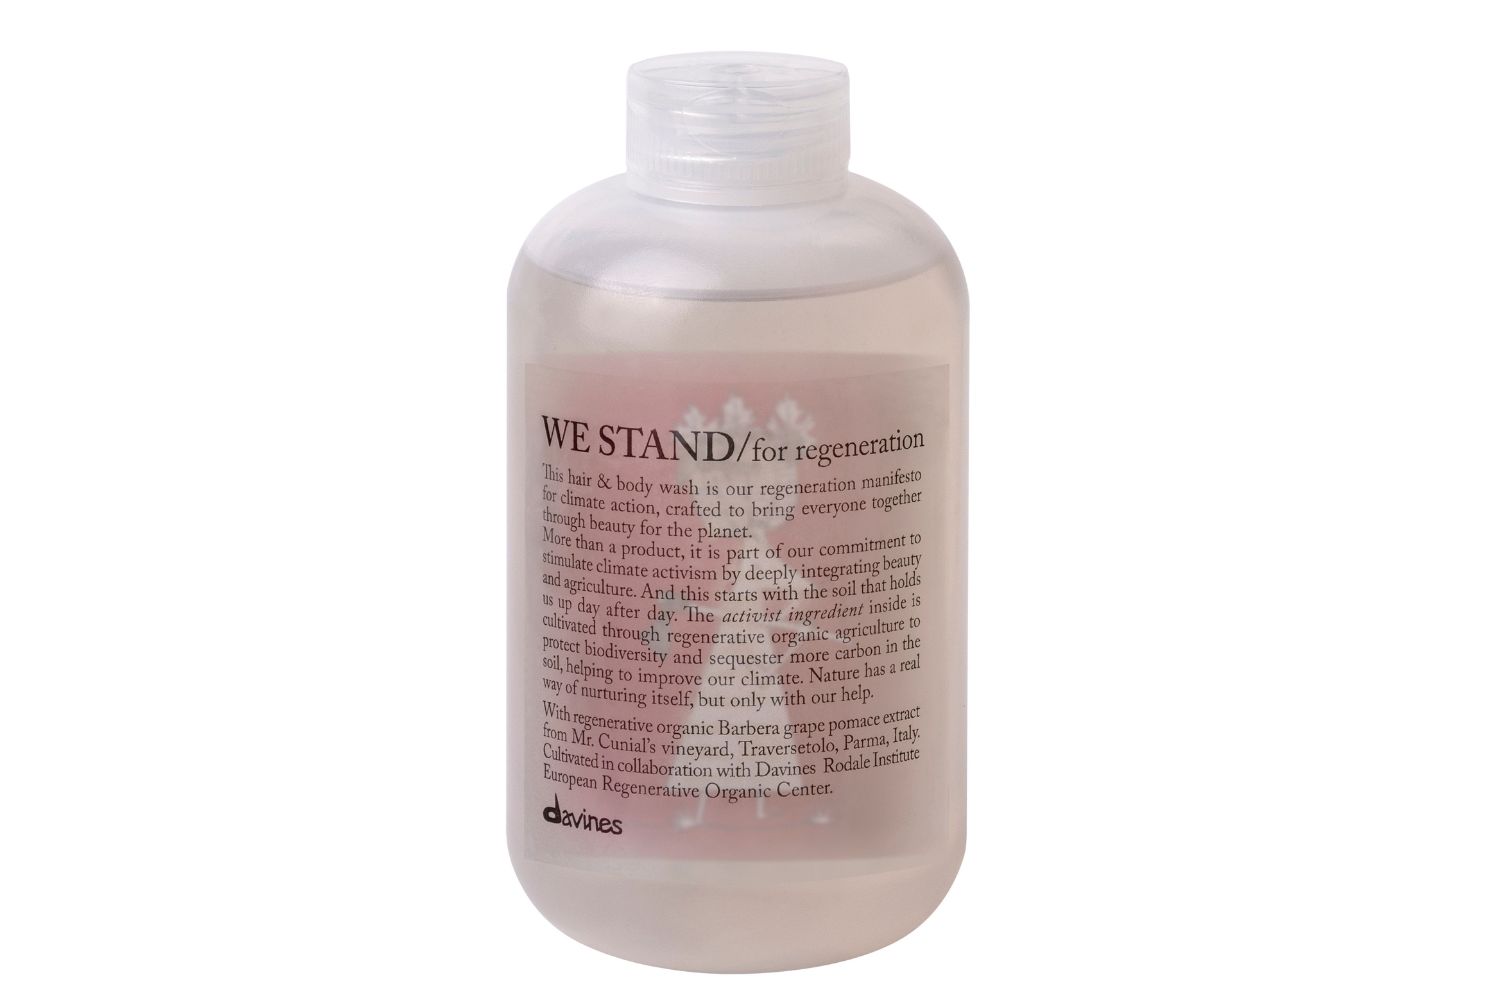 Davines WE STAND/for regeneration Hair & Body Wash, $40.95 at Luxe Concept Salon